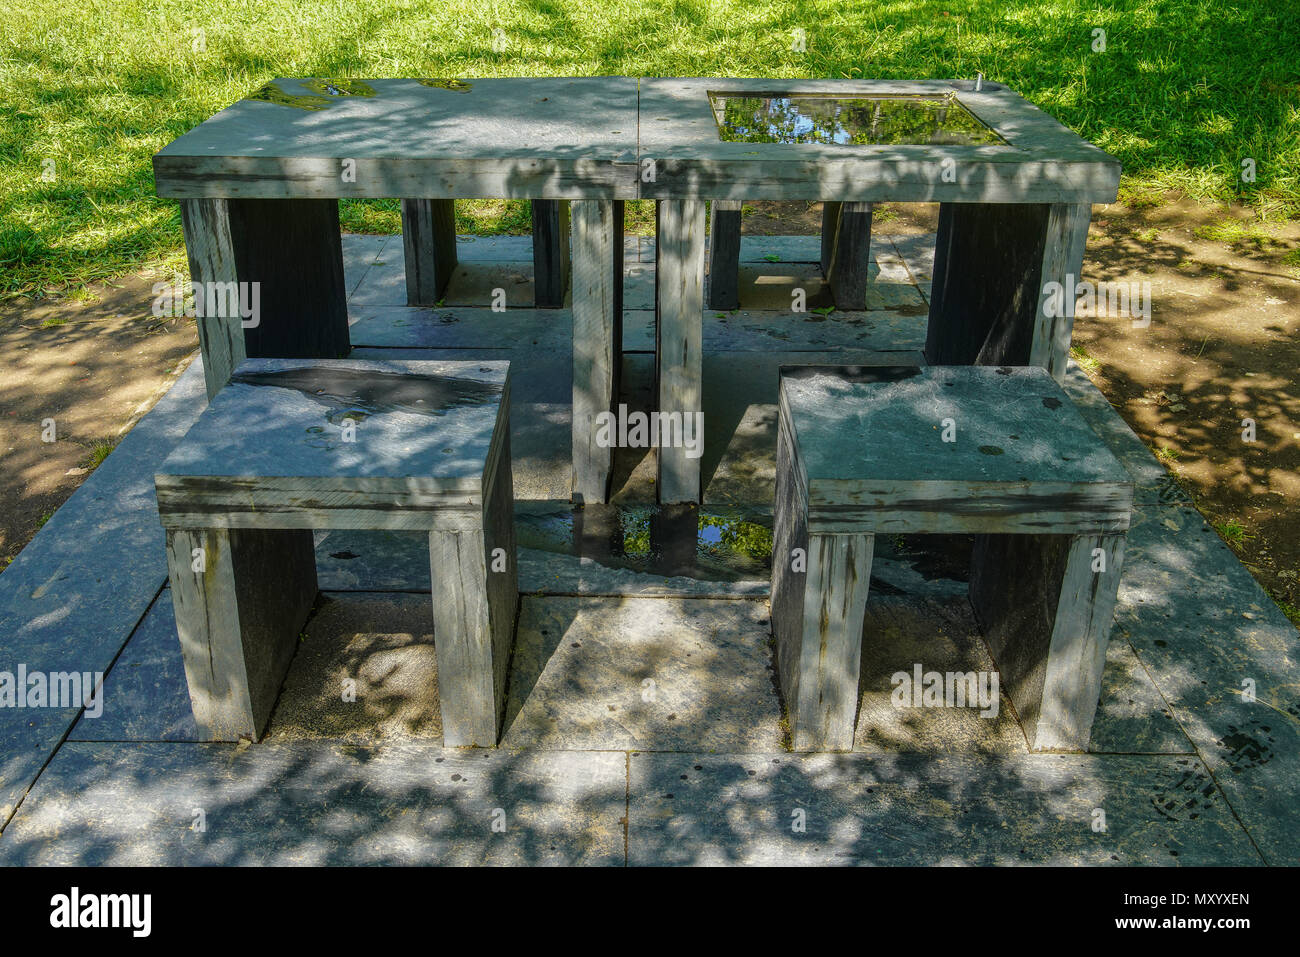 New City by Maria Nordman, table with four individual seats, with shade offered by the surrounding trees., Serralves Park, Porto, Portugal Stock Photo